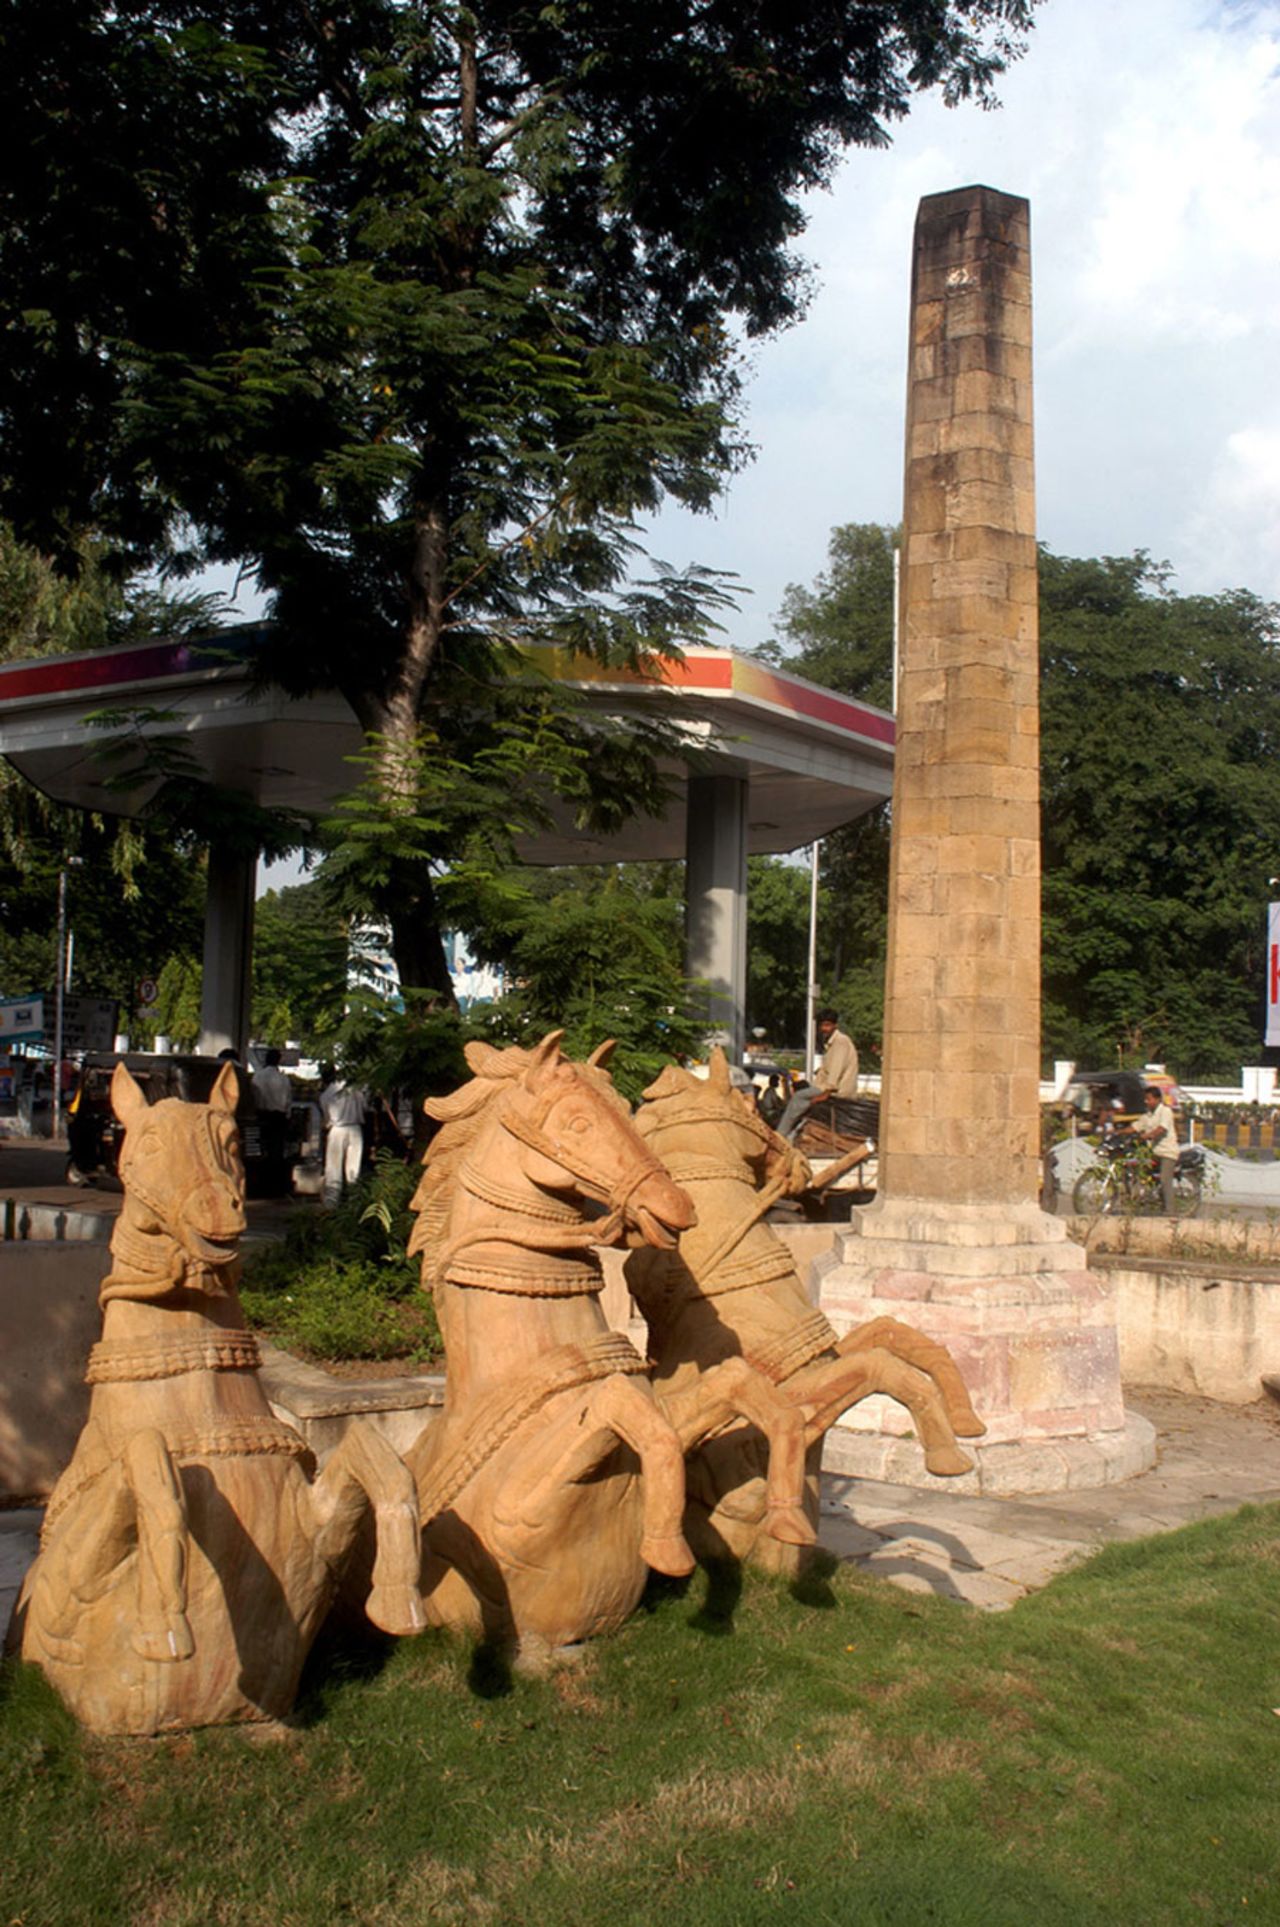 The Zero Mile pillar depicts the geographical centre of India, Nagpur